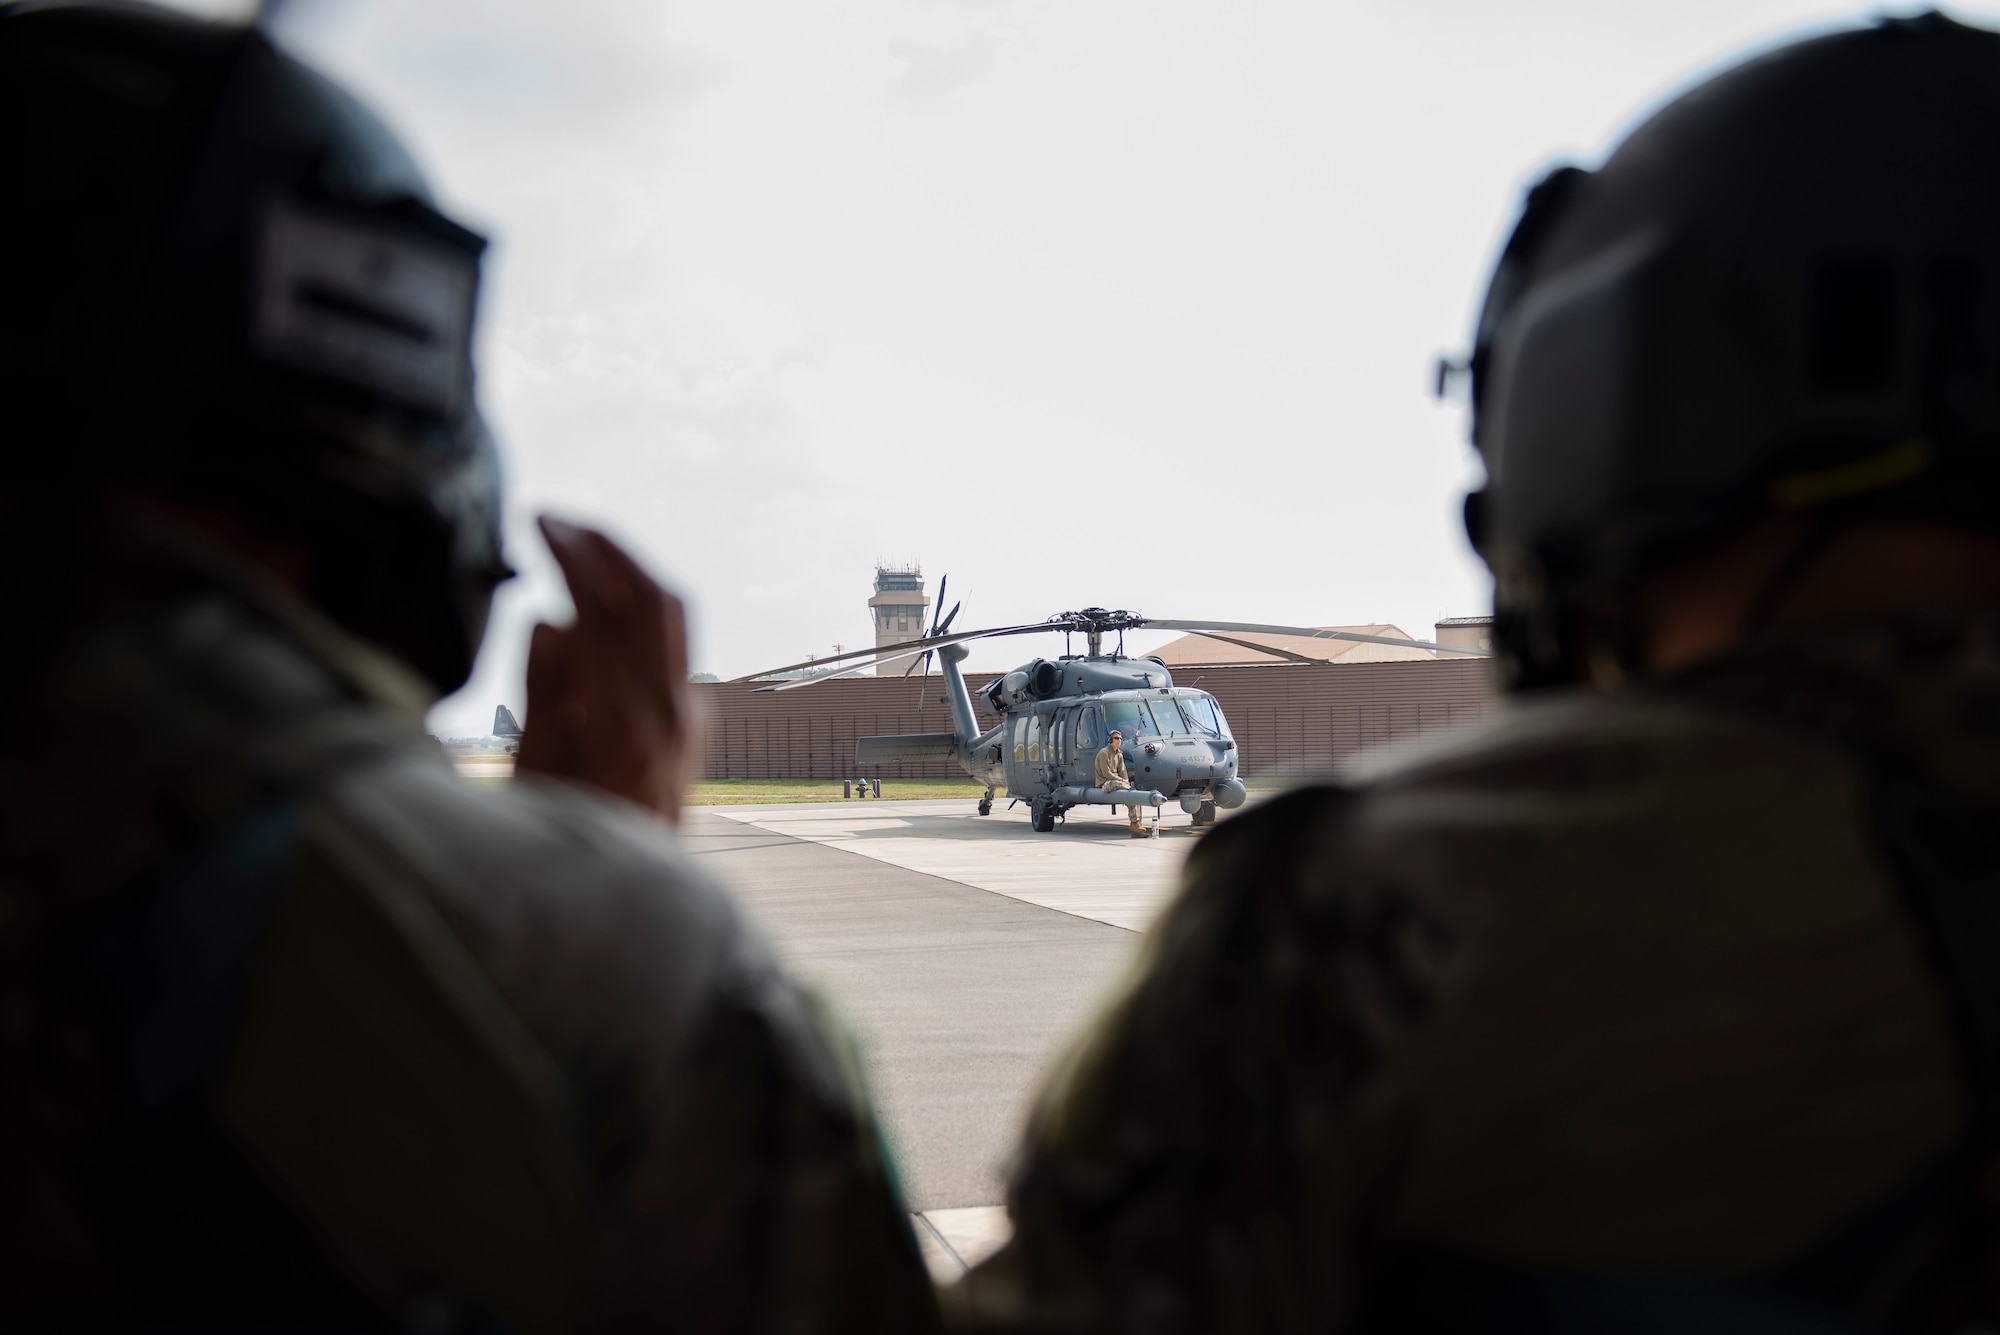 33rd Rescue Squadron Airmen prepare for flight in a HH-60G Pave Hawk helicopter during a combat search and rescue training event